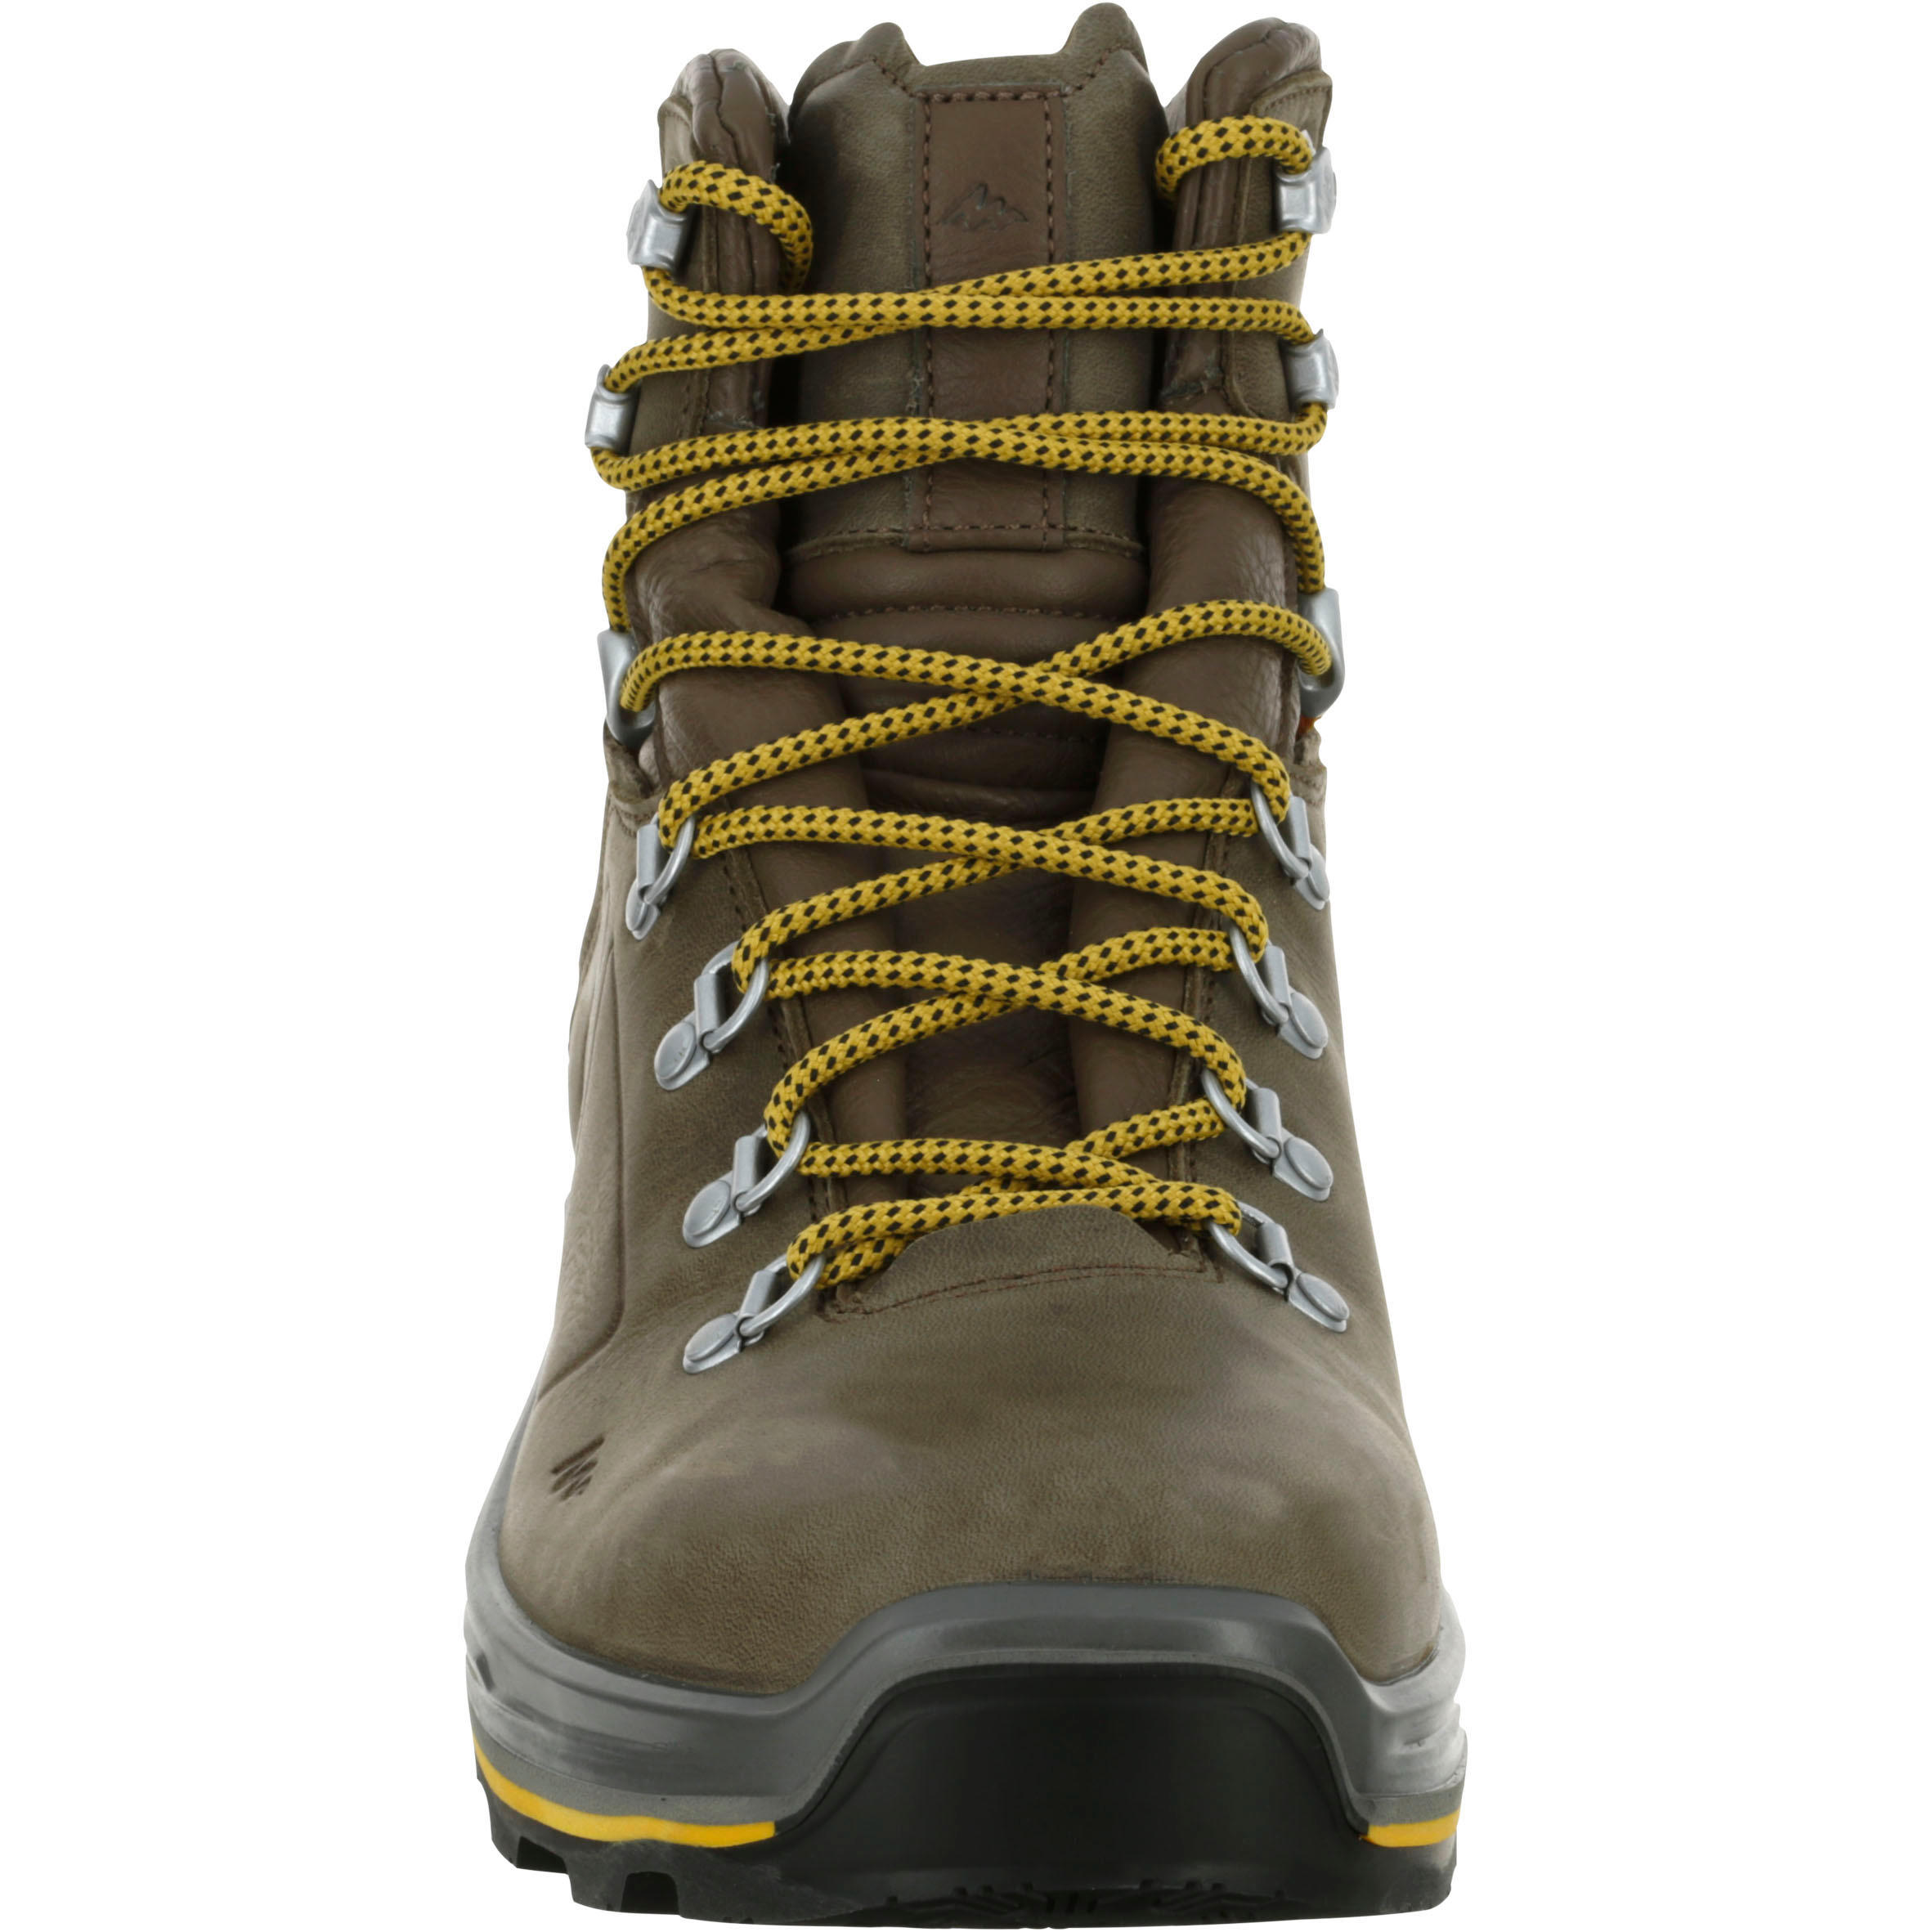 Which brand of shoes are the best for trekking of moderate level  difficulty Woodland Quechua or Wildcraft  Quora